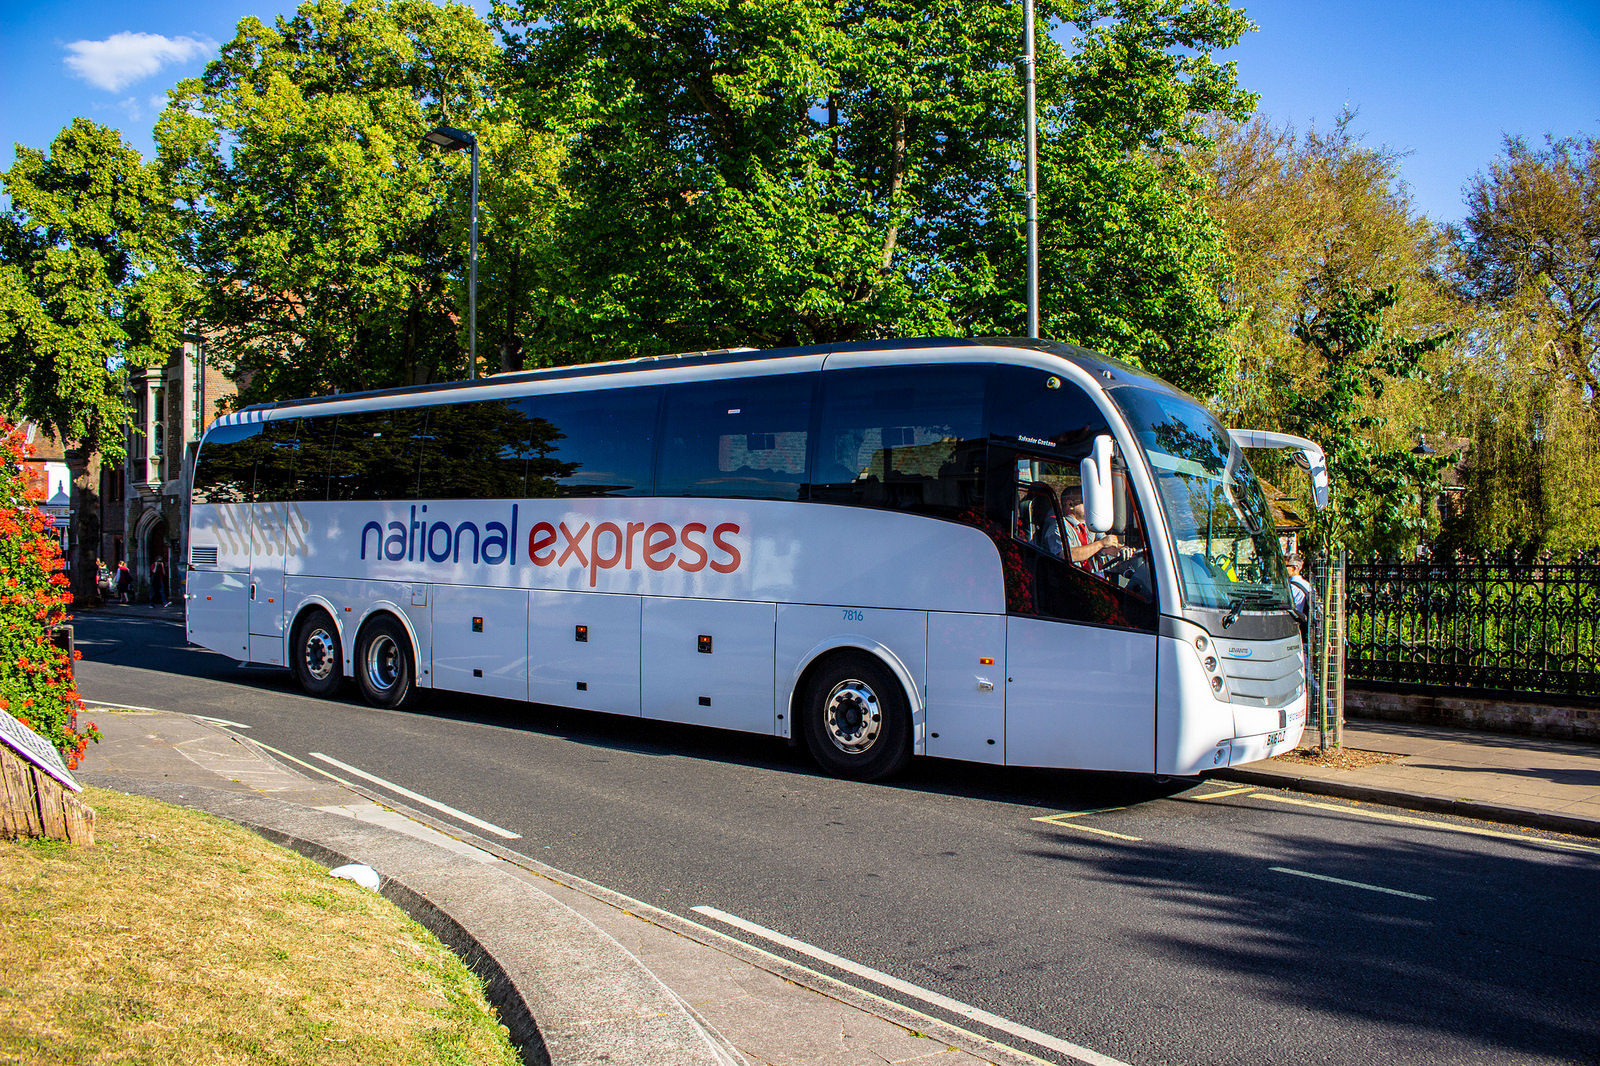 National Express coach bus travel in Britain